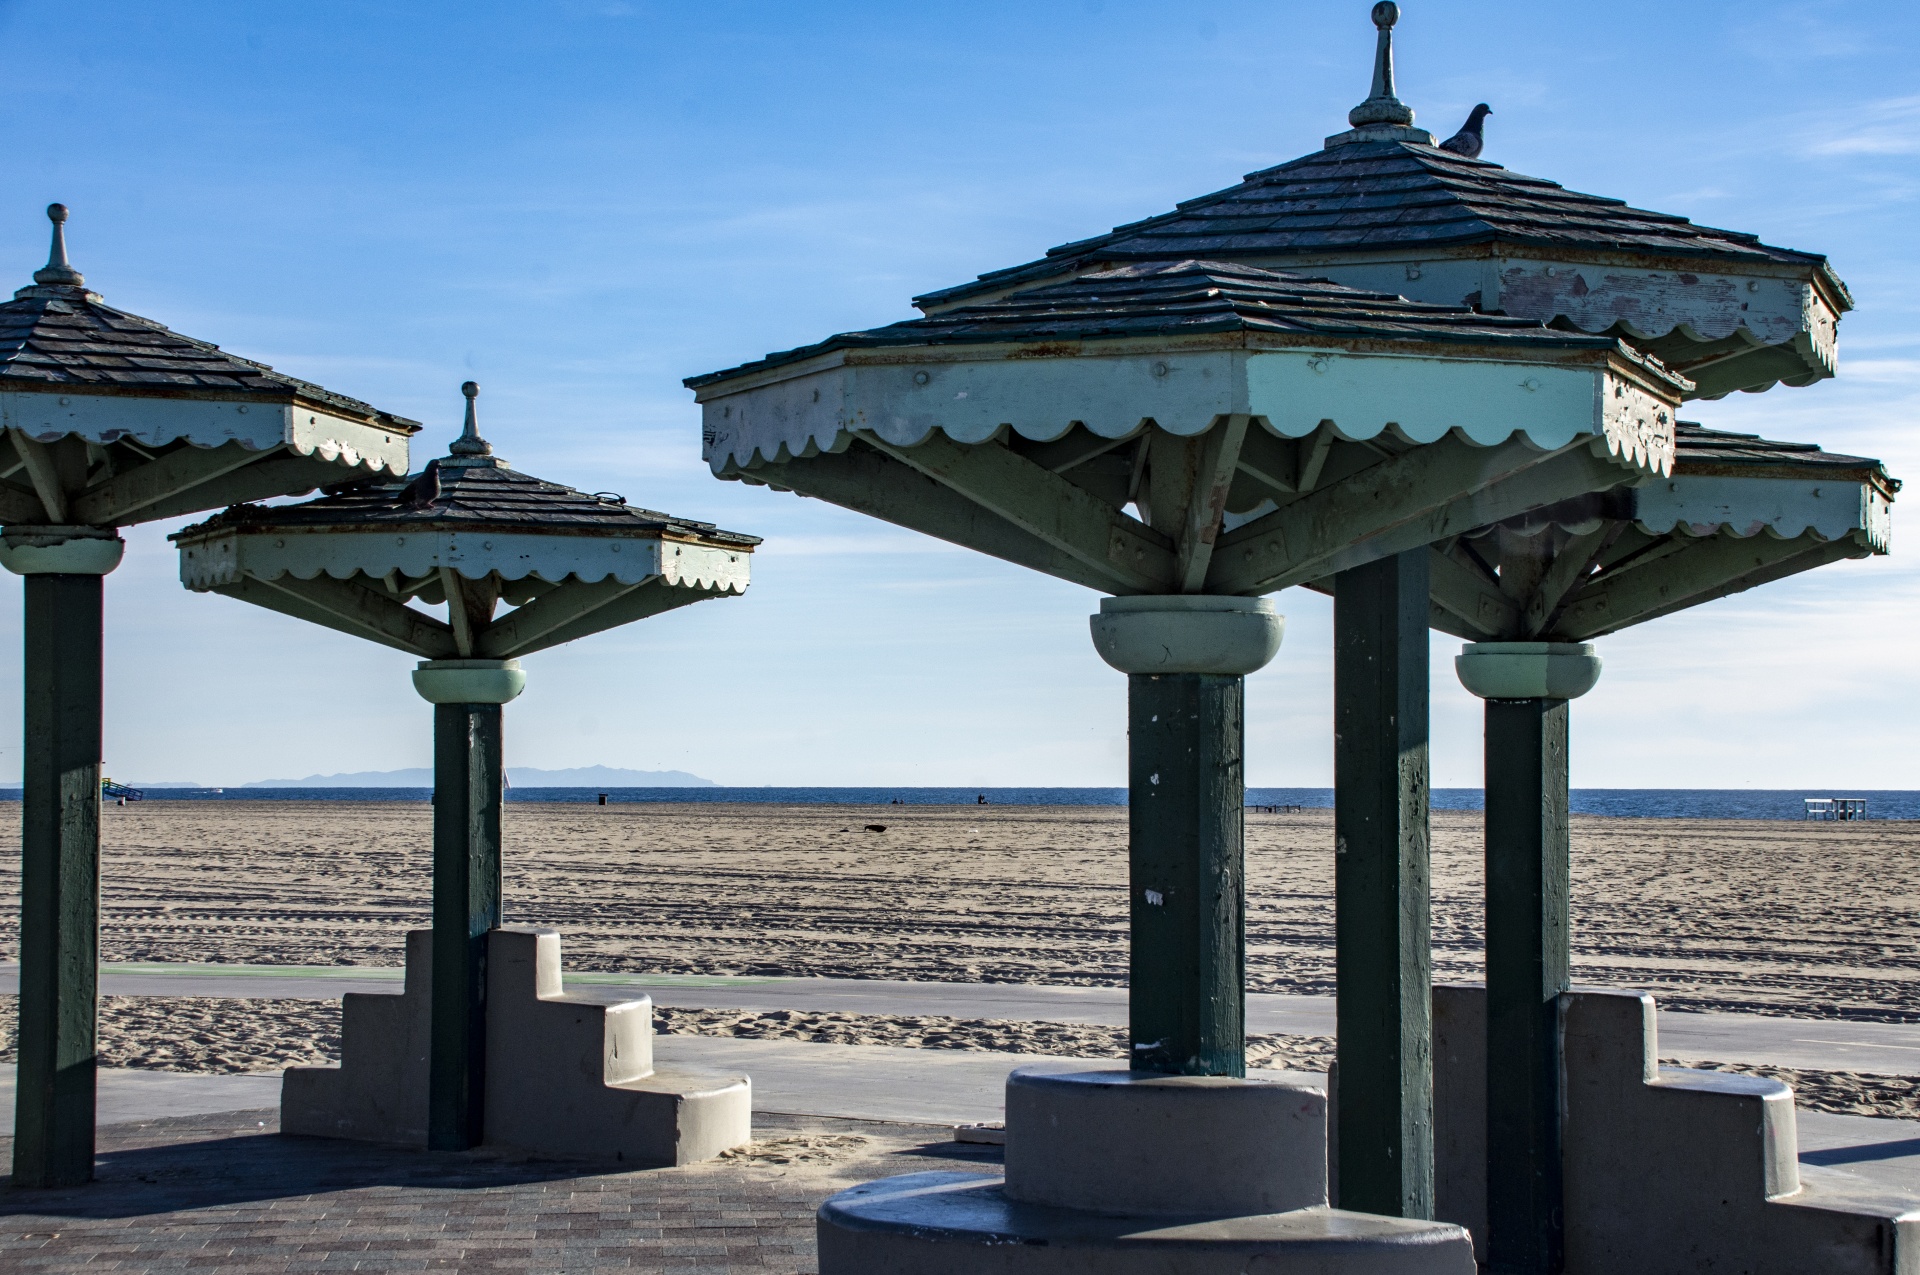 several wood canopies on shores of Venice Beach, california. One has a pigeon sitting on its roof